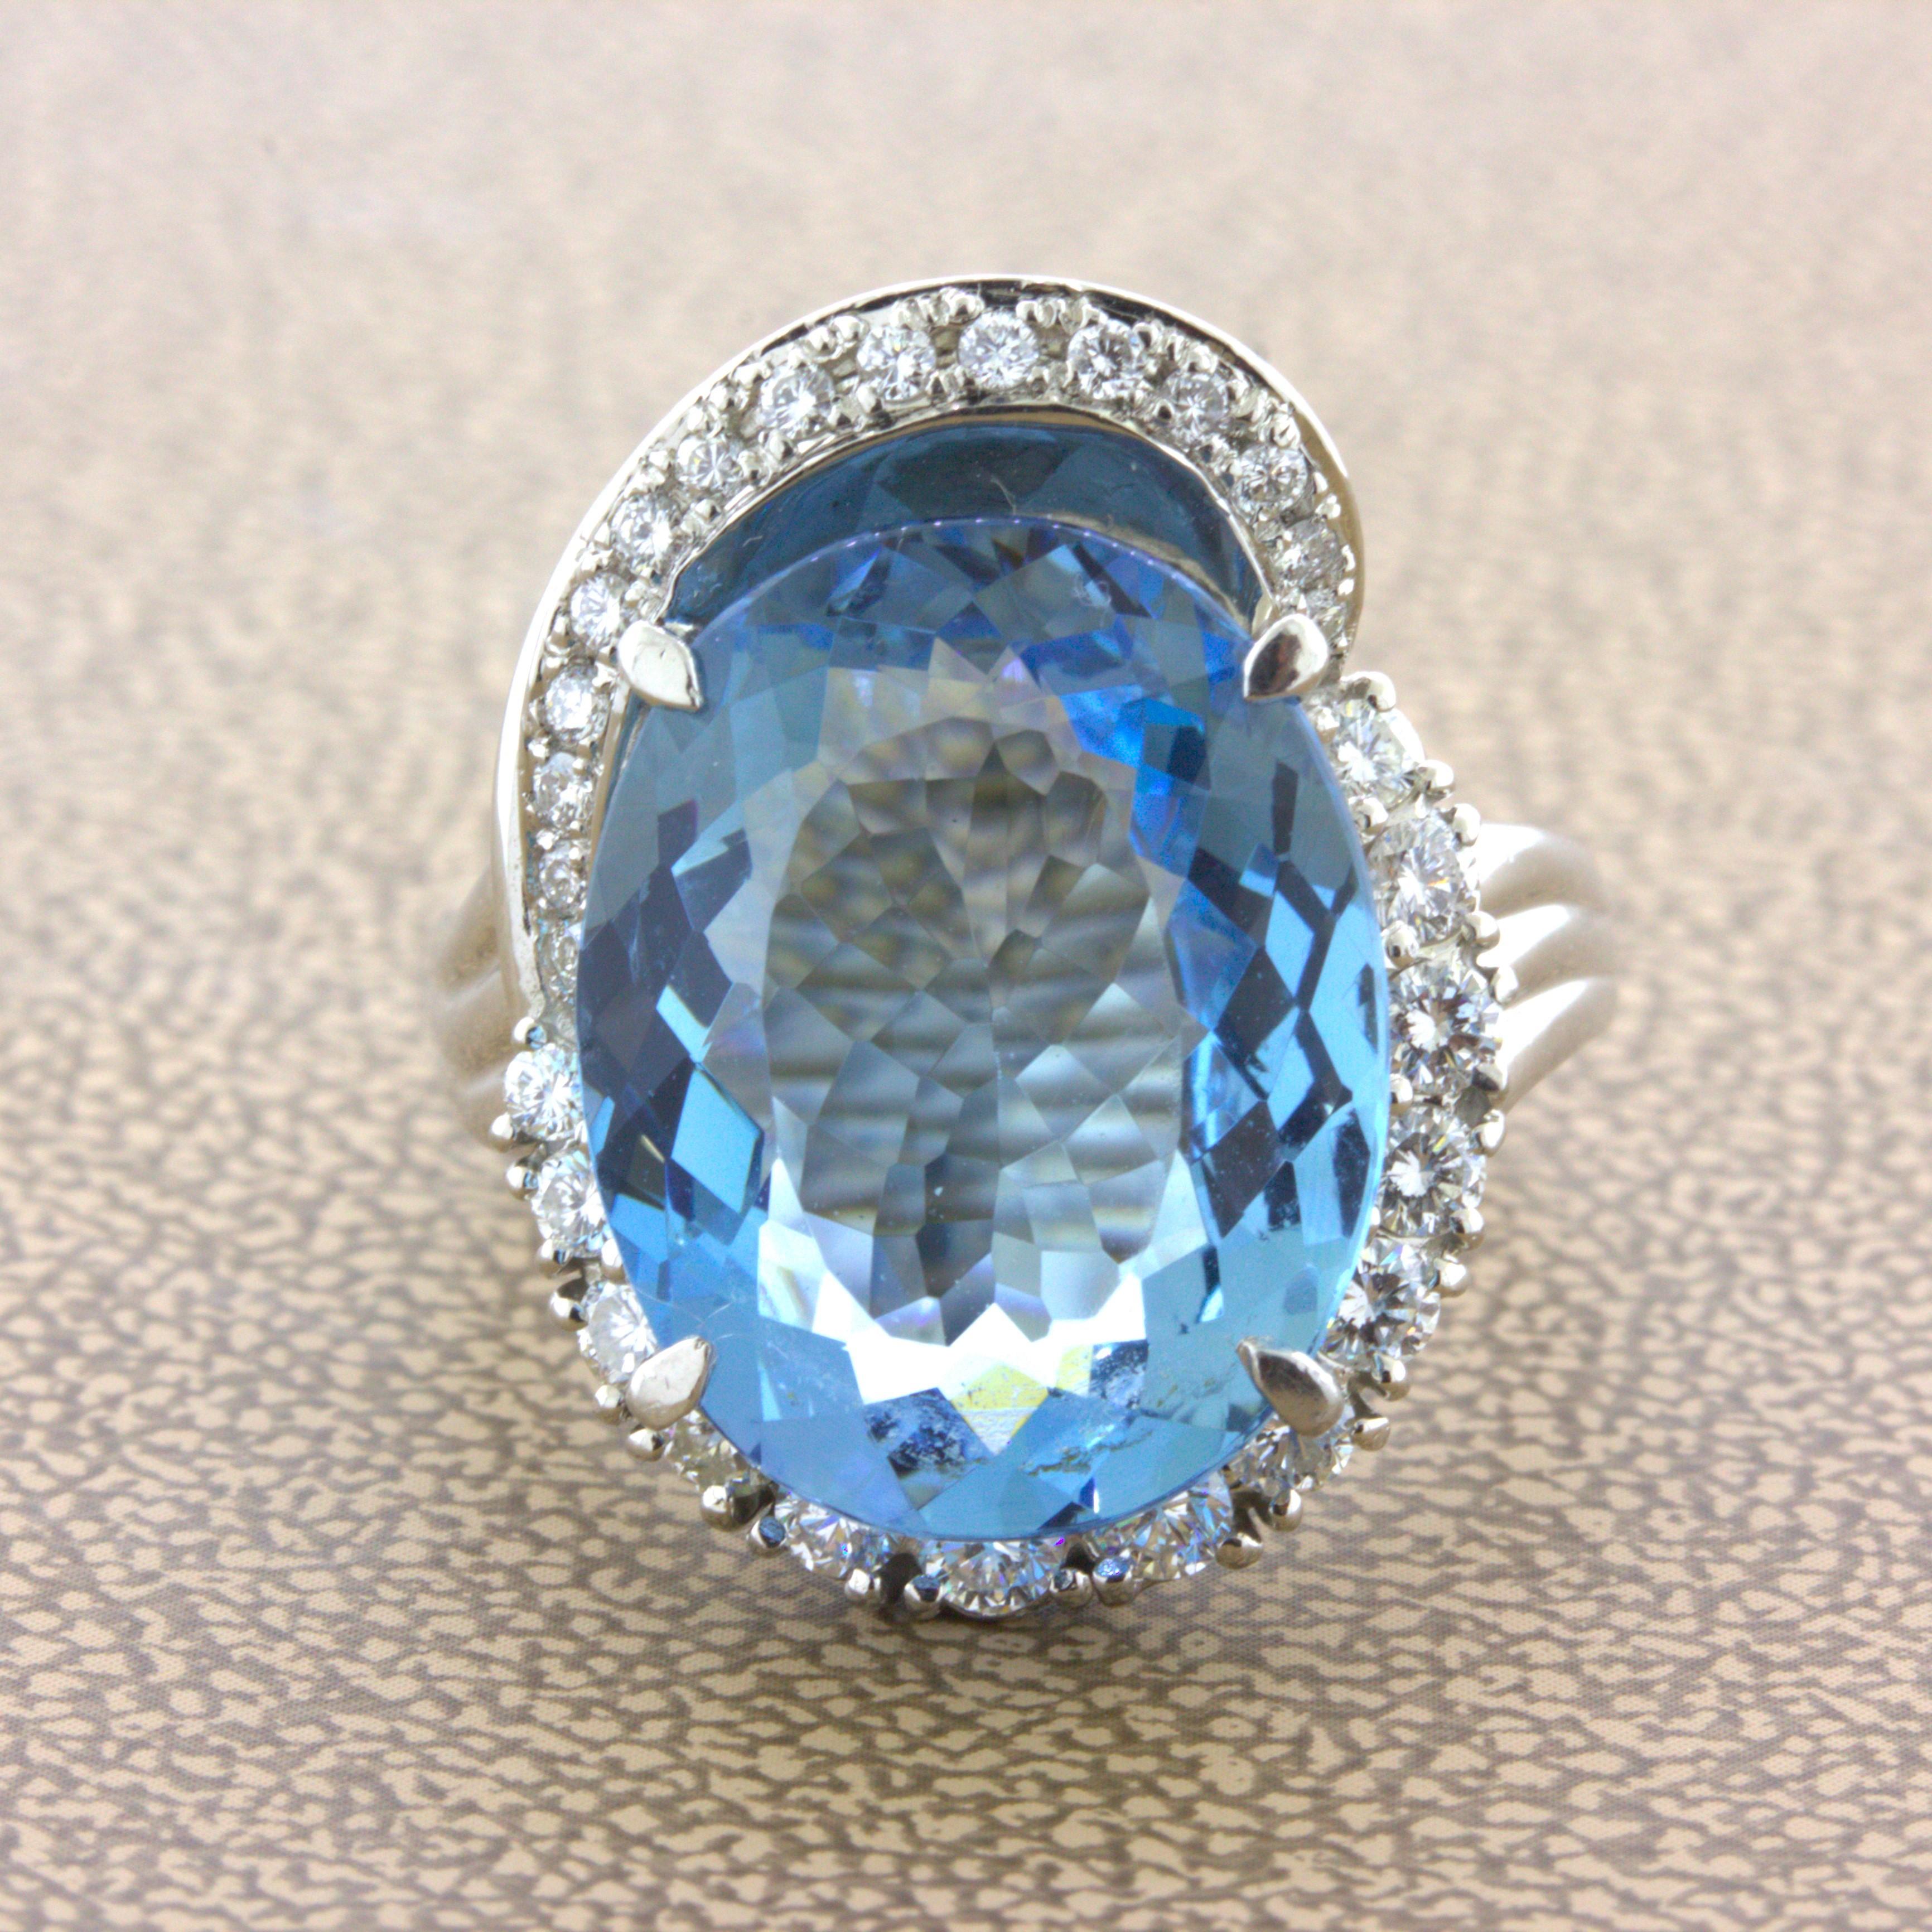 9.09 Carat Aquamarine Diamond Platinum Ring

A lovely and chic gemstone ring featuring a fine 9.09 carat aquamarine. It is shaped as an oval and has the ideal rich sea-blue color which aquamarine is known for. It is complemented by 0.74 carts of